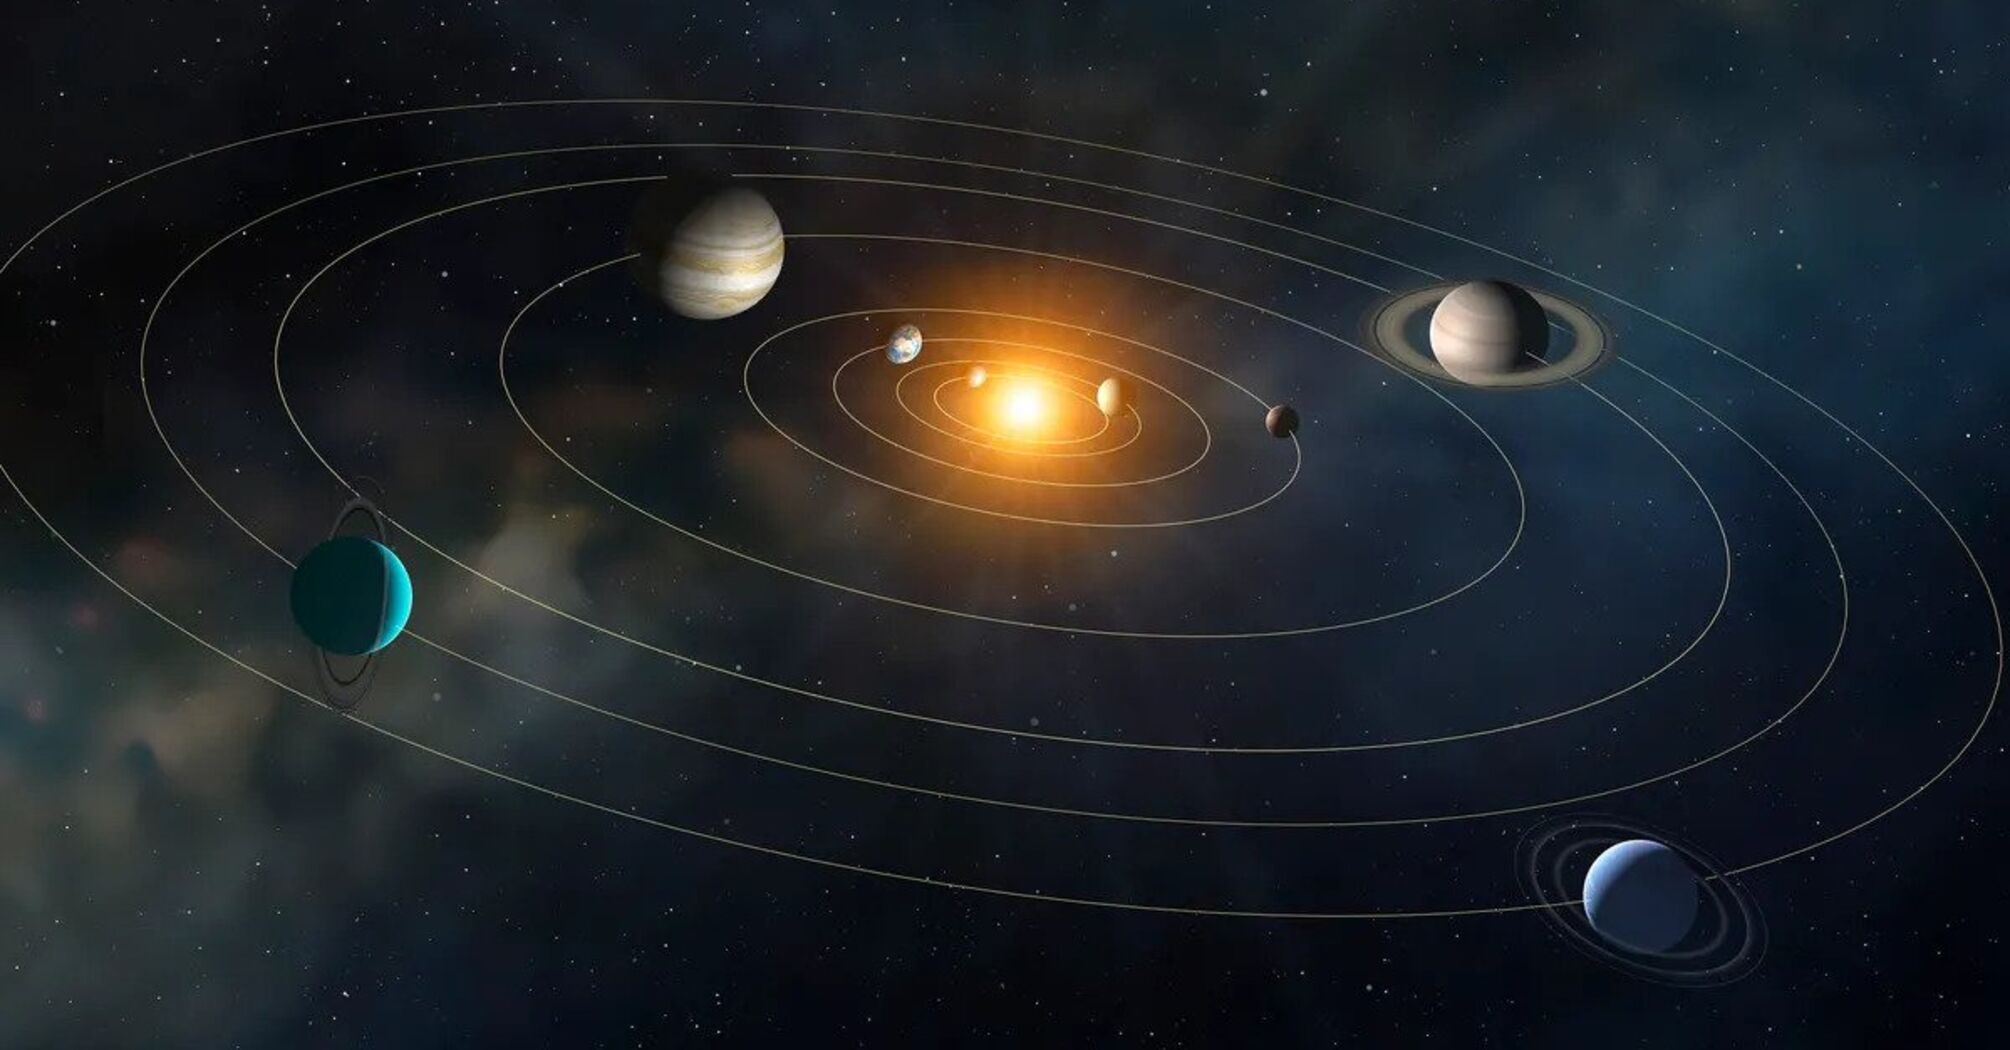 At the edge of the Solar System, there appears to be an abundance of interplanetary dust